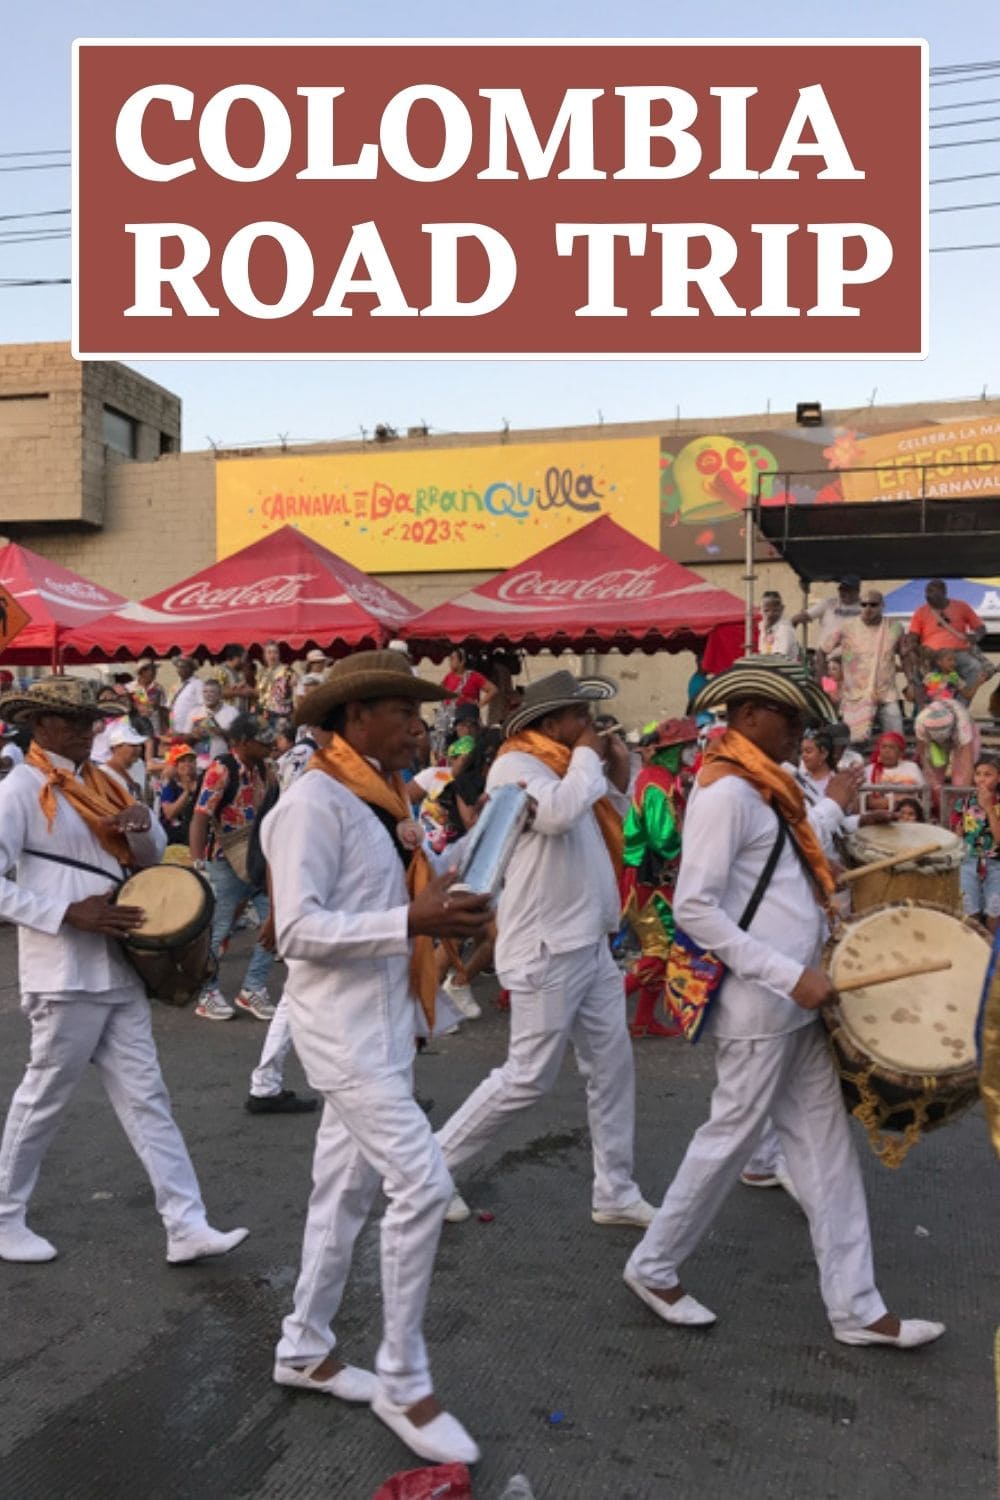 This road trip in Colombia itinerary can be done by bus or car and will take you to all the amazing cities, sights and nature it offers. #colombia